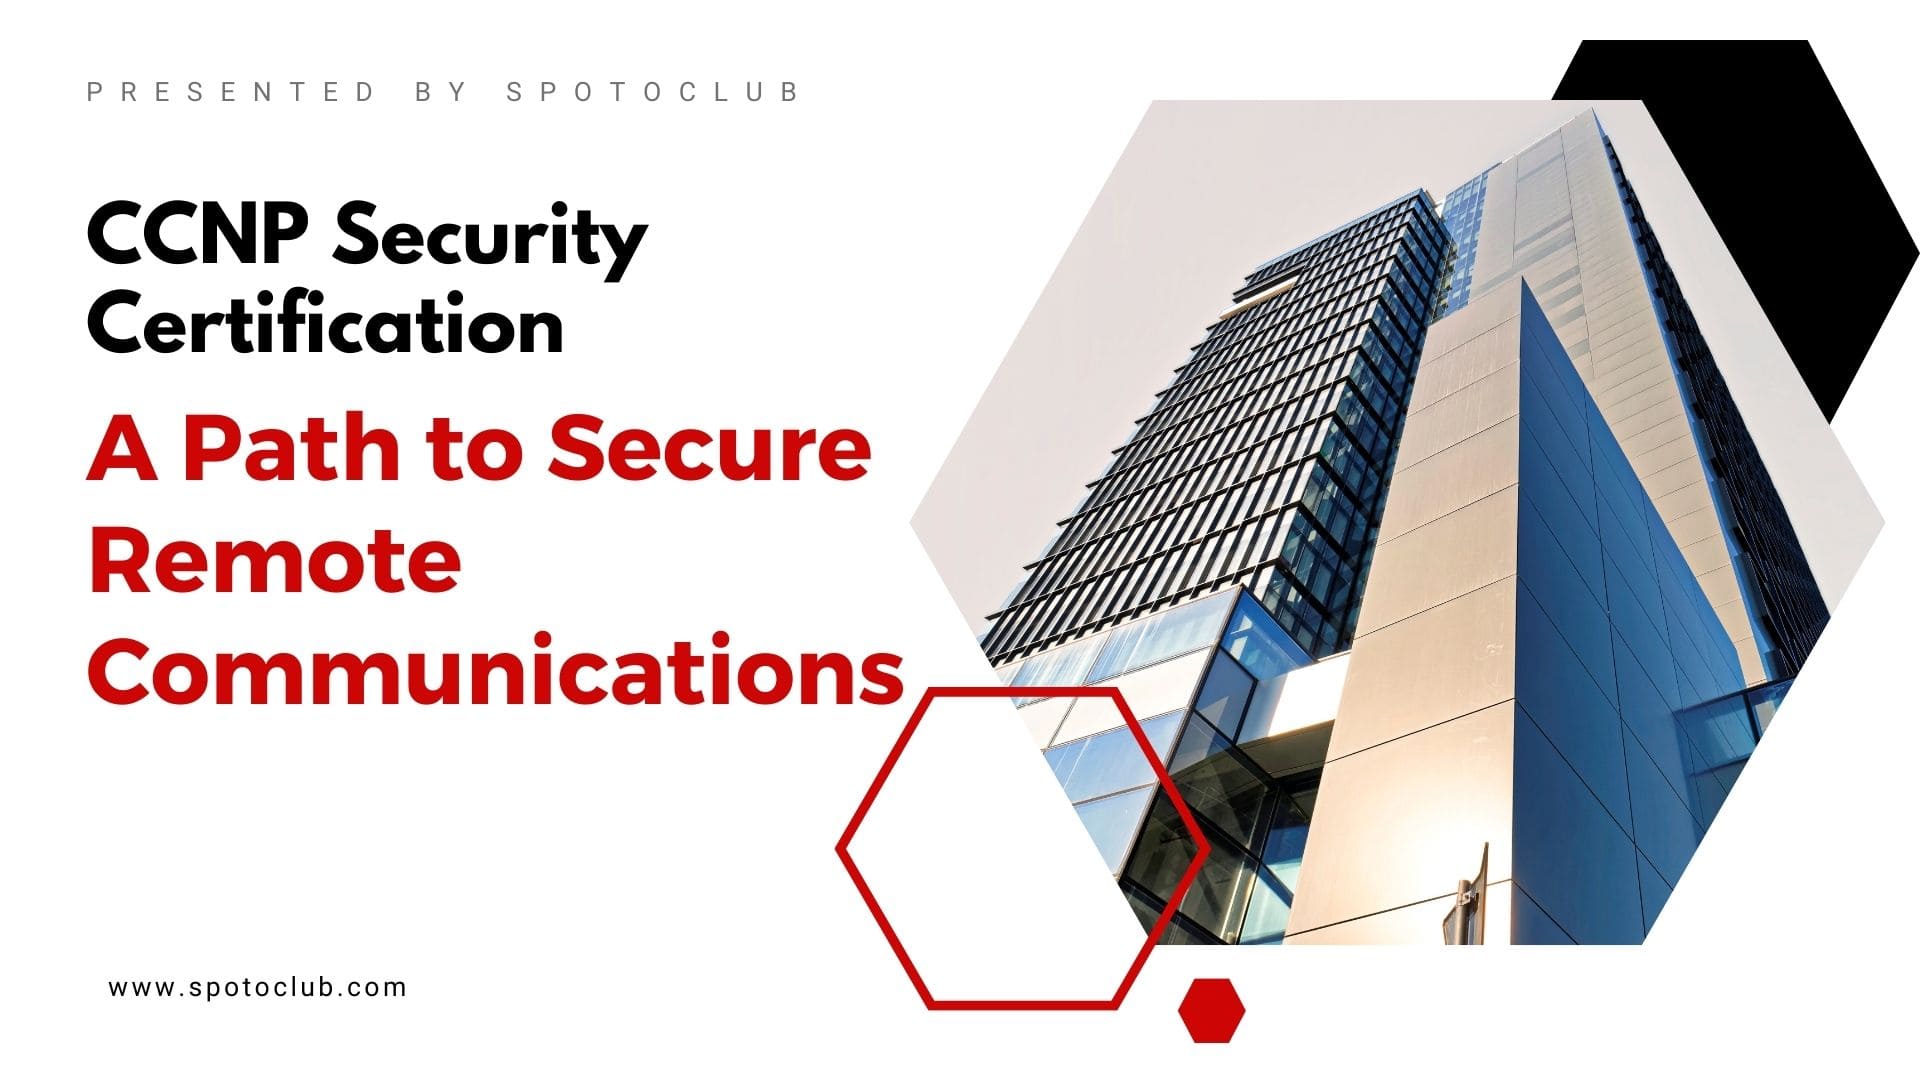 A Path to Secure Remote Communications